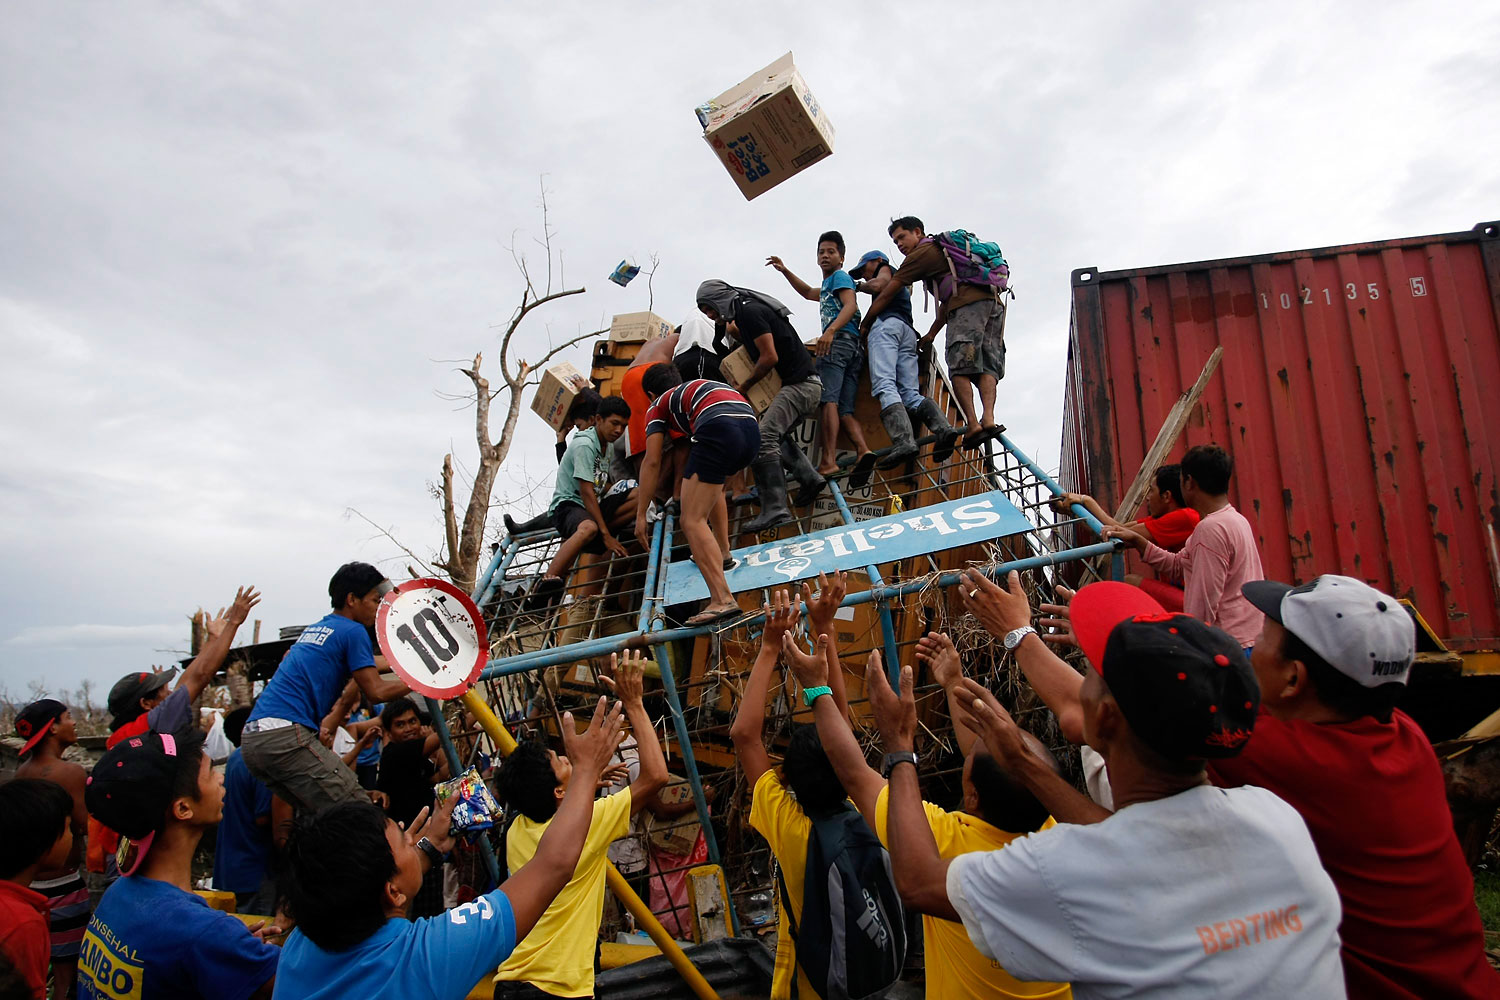 Filipino villagers force open a washed up container containing grocery items in the super typhoon devastated city of Tacloban, Leyte island province, Philippines, November 20, 2013.